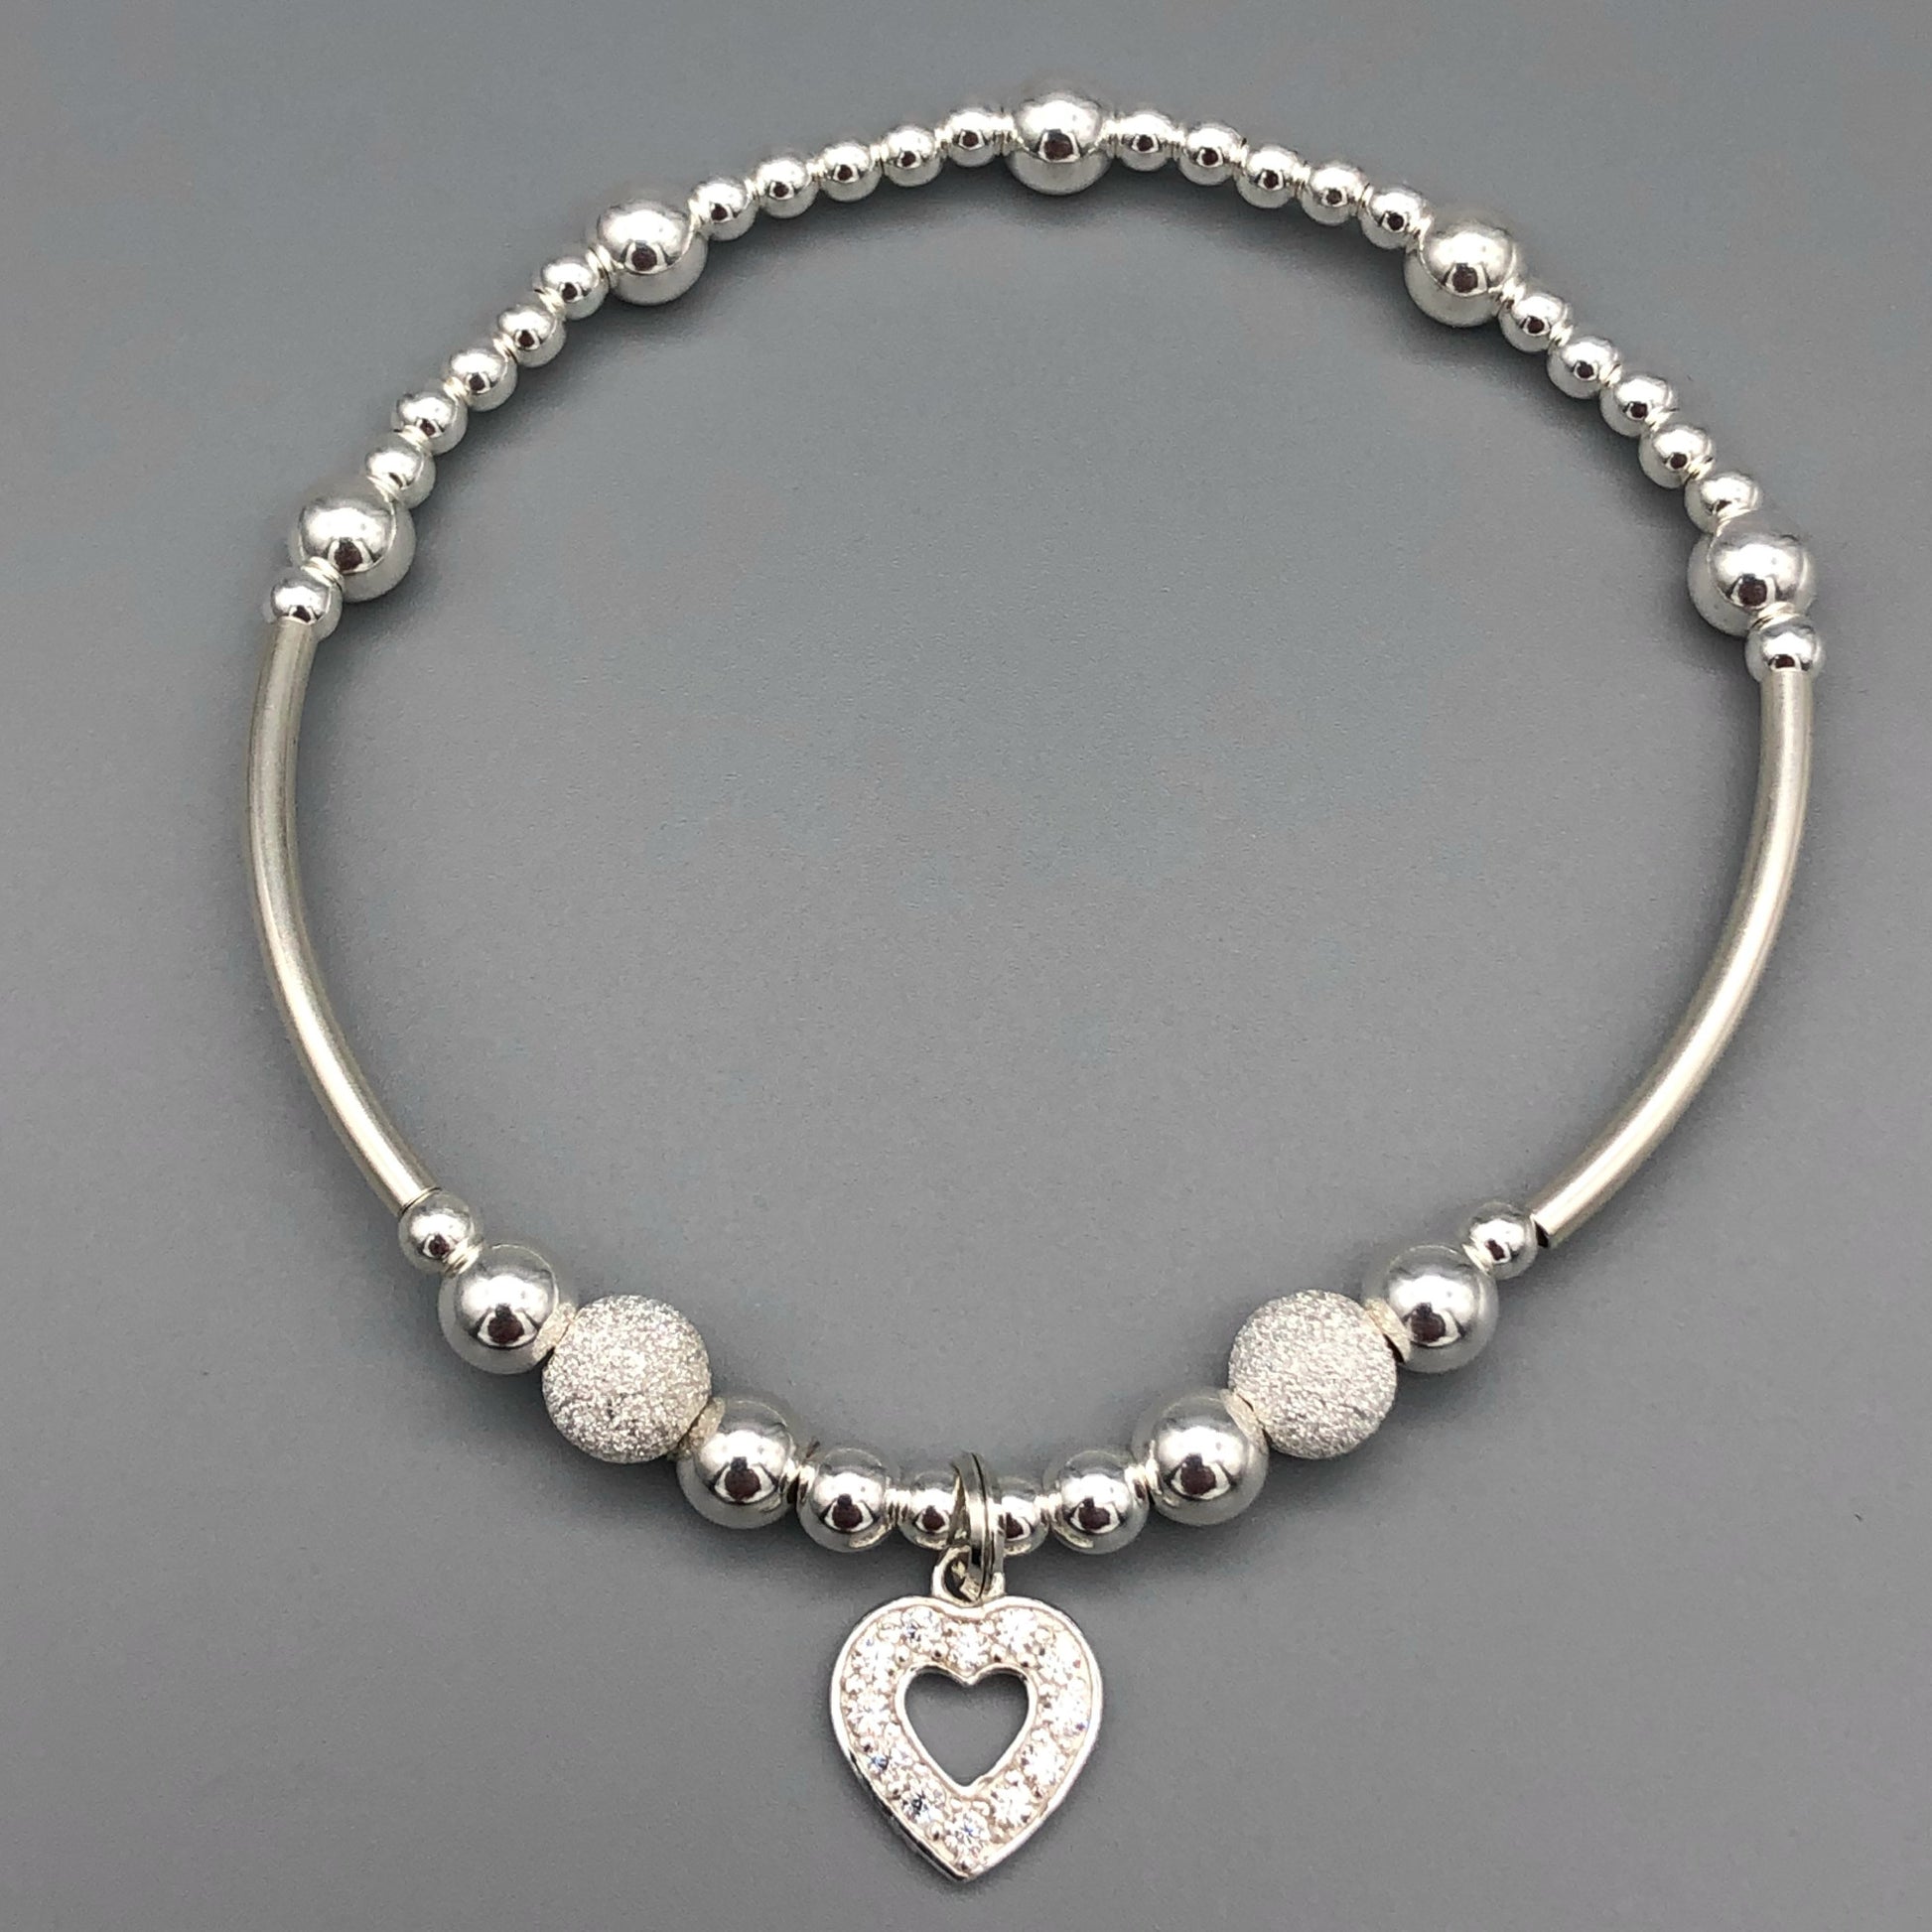 Diamond heart charm starburst beads sterling silver hand-made girl's stacking bracelet by My Silver Wish